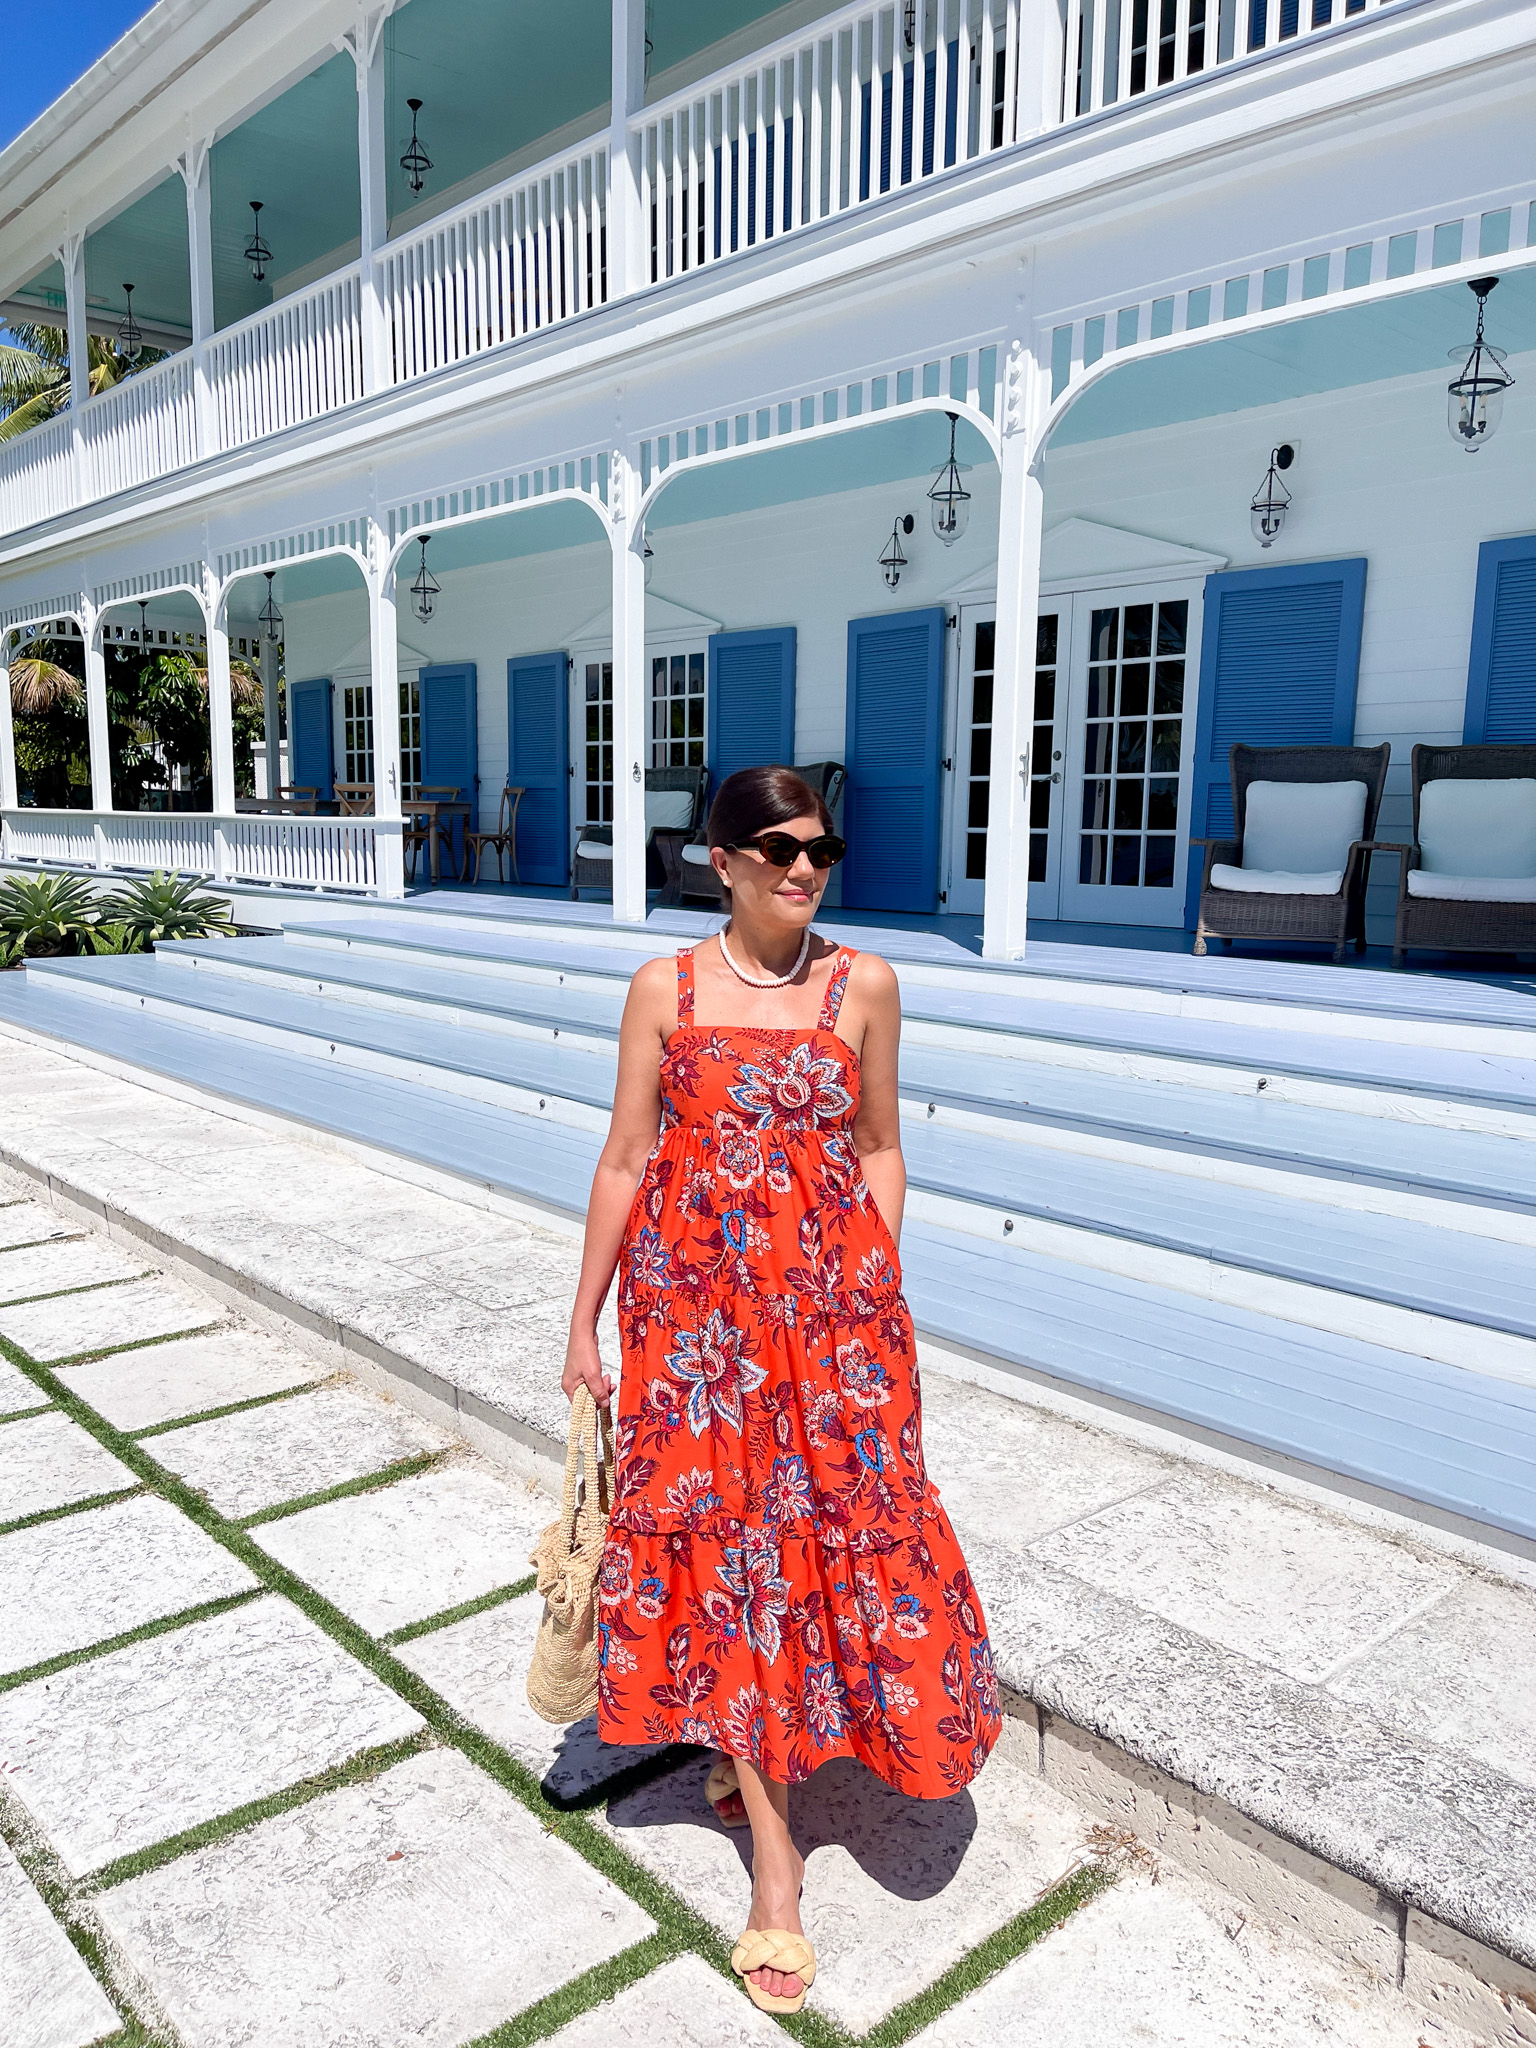 Desiree Leone of Beautifully Seaside features the prettiest summertime accessories and bags for weekends and vacation.